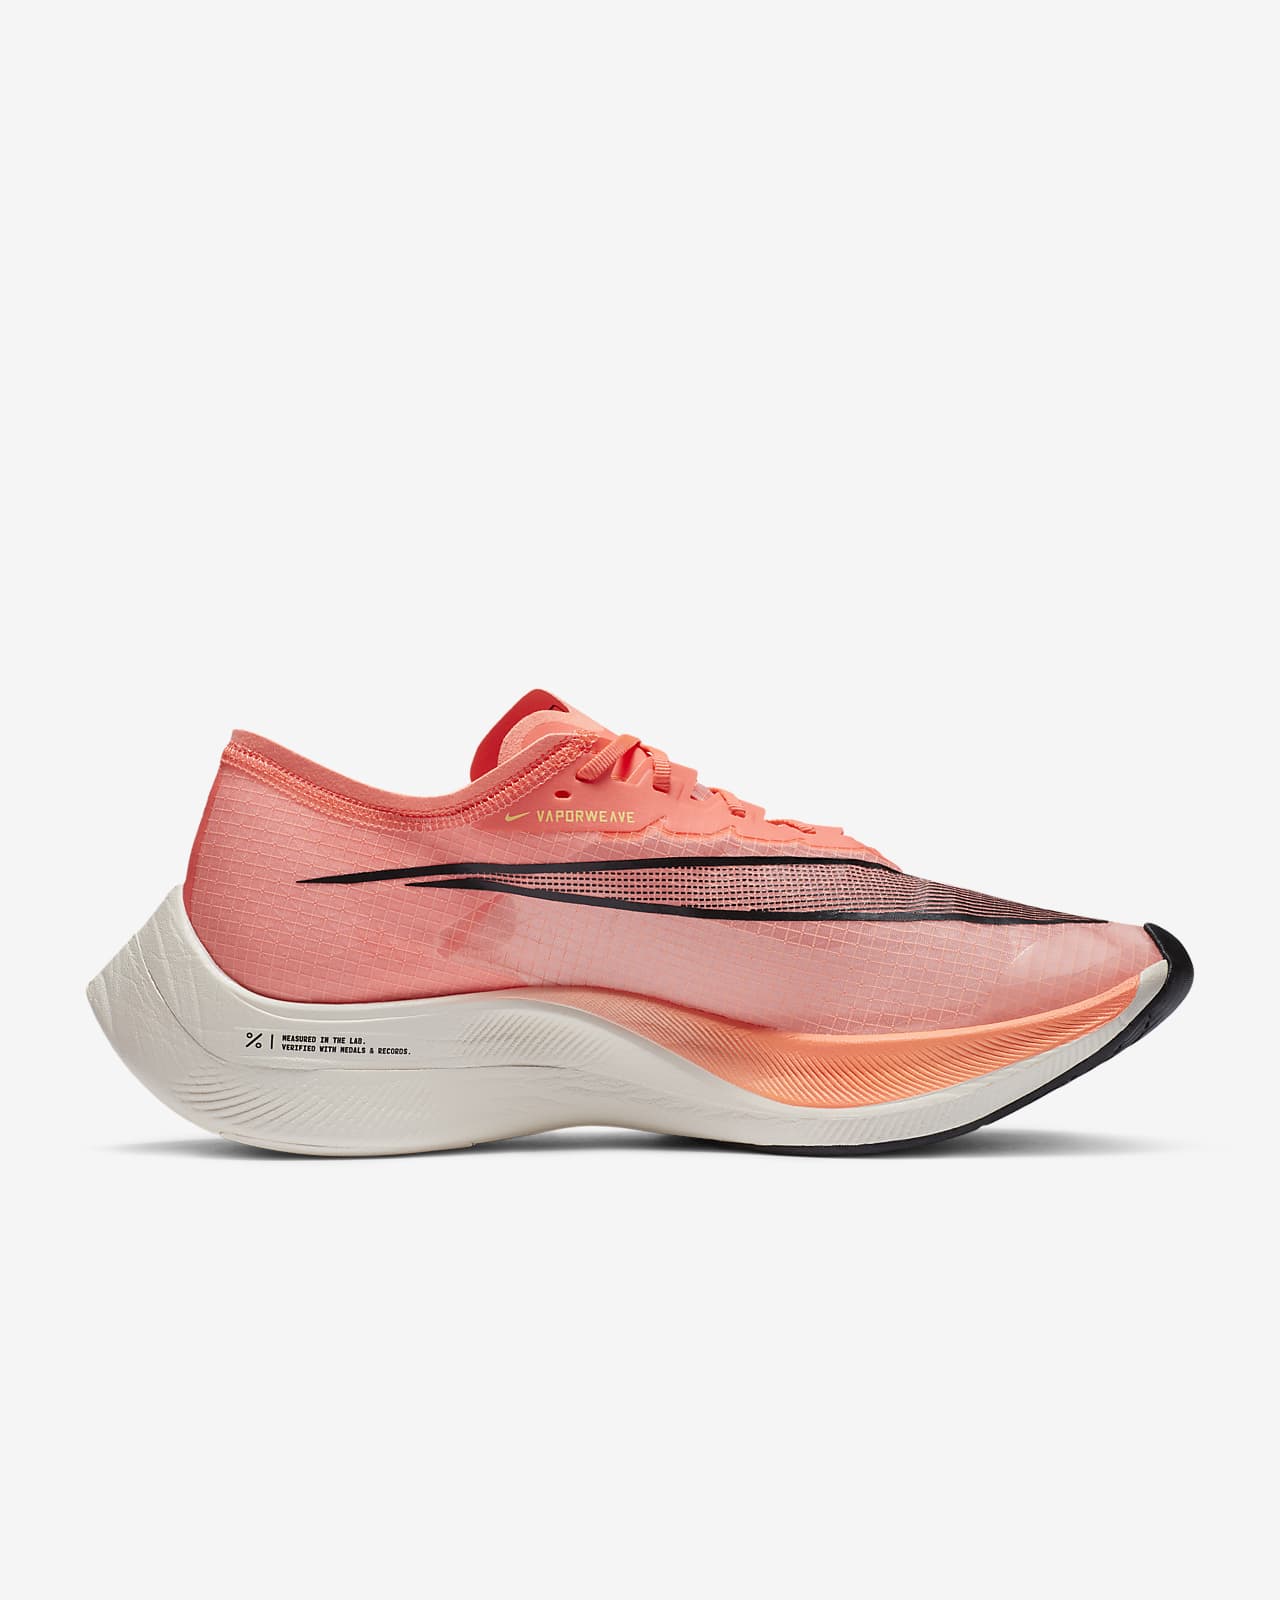 nike zoomx vaporfly next out of stock